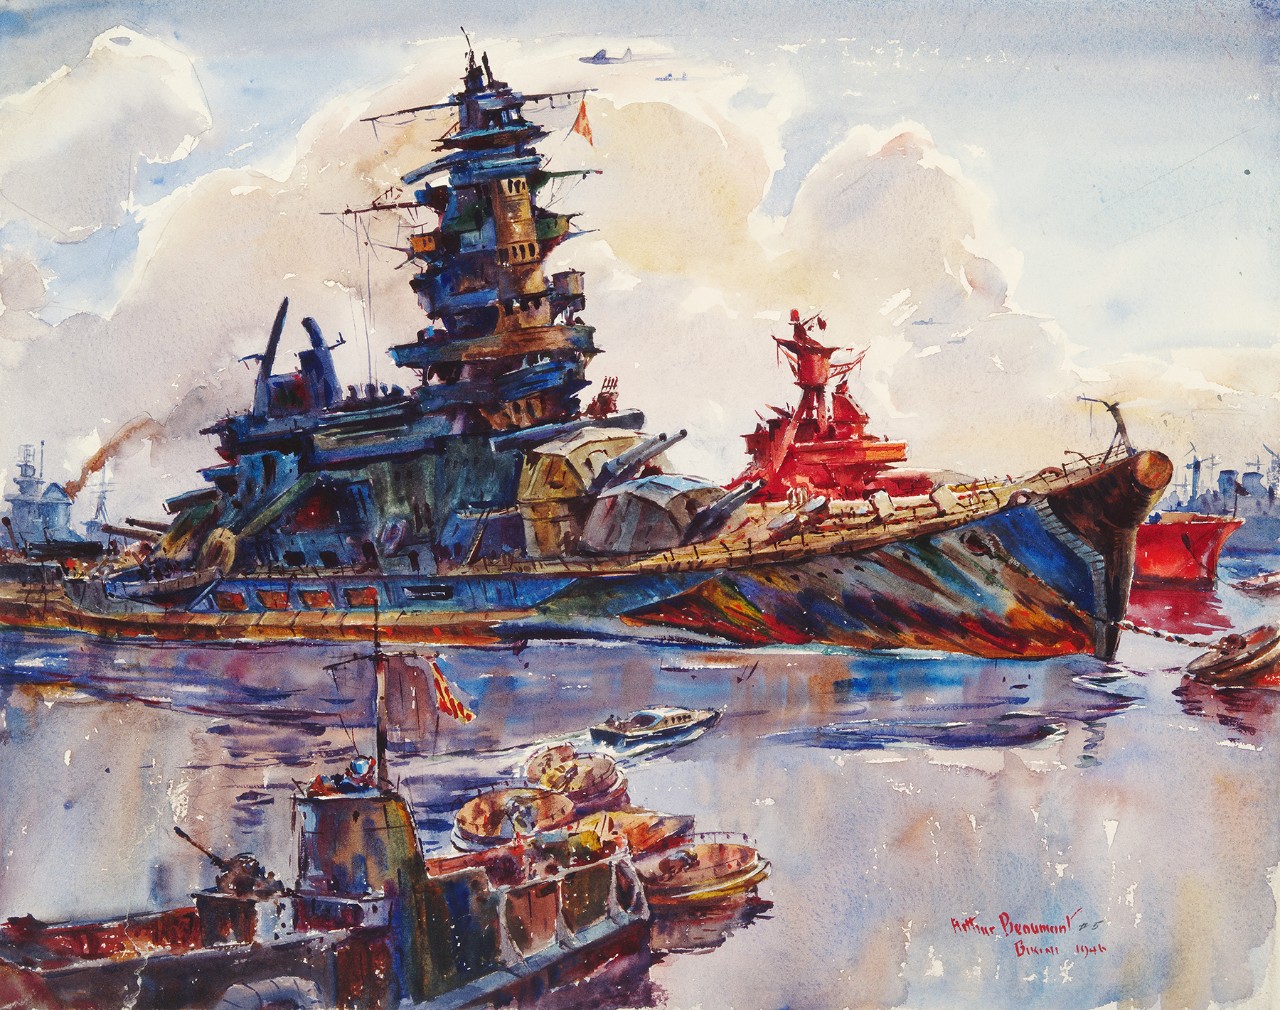 Heavily damaged battleship with other ships